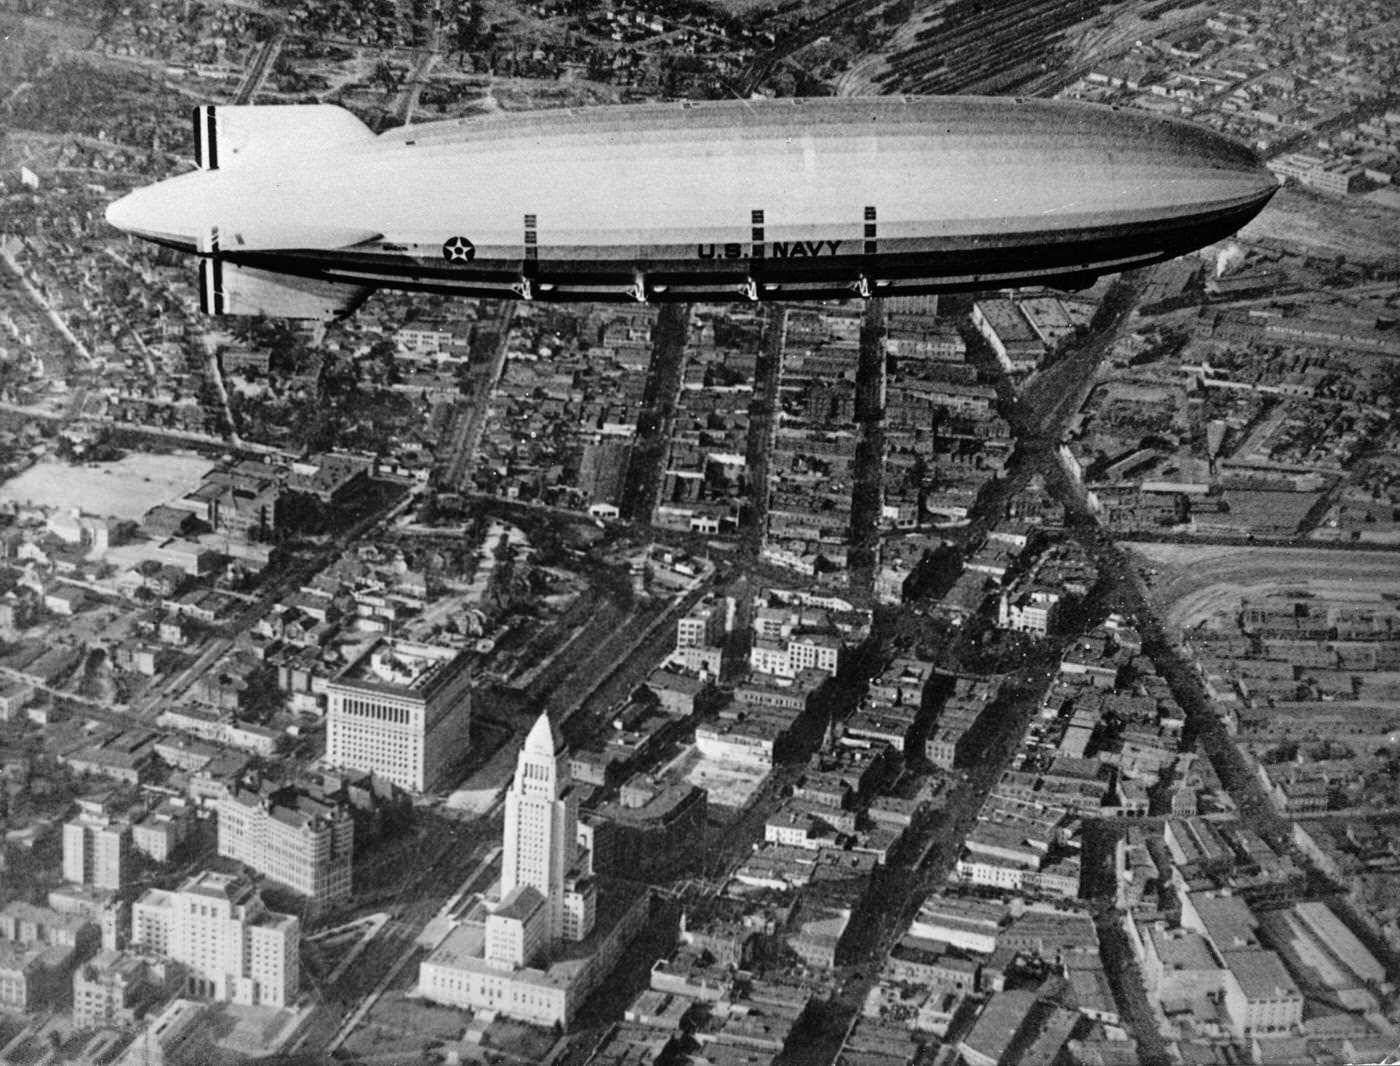 The US-Airship Macon over Los Angeles, 1934.